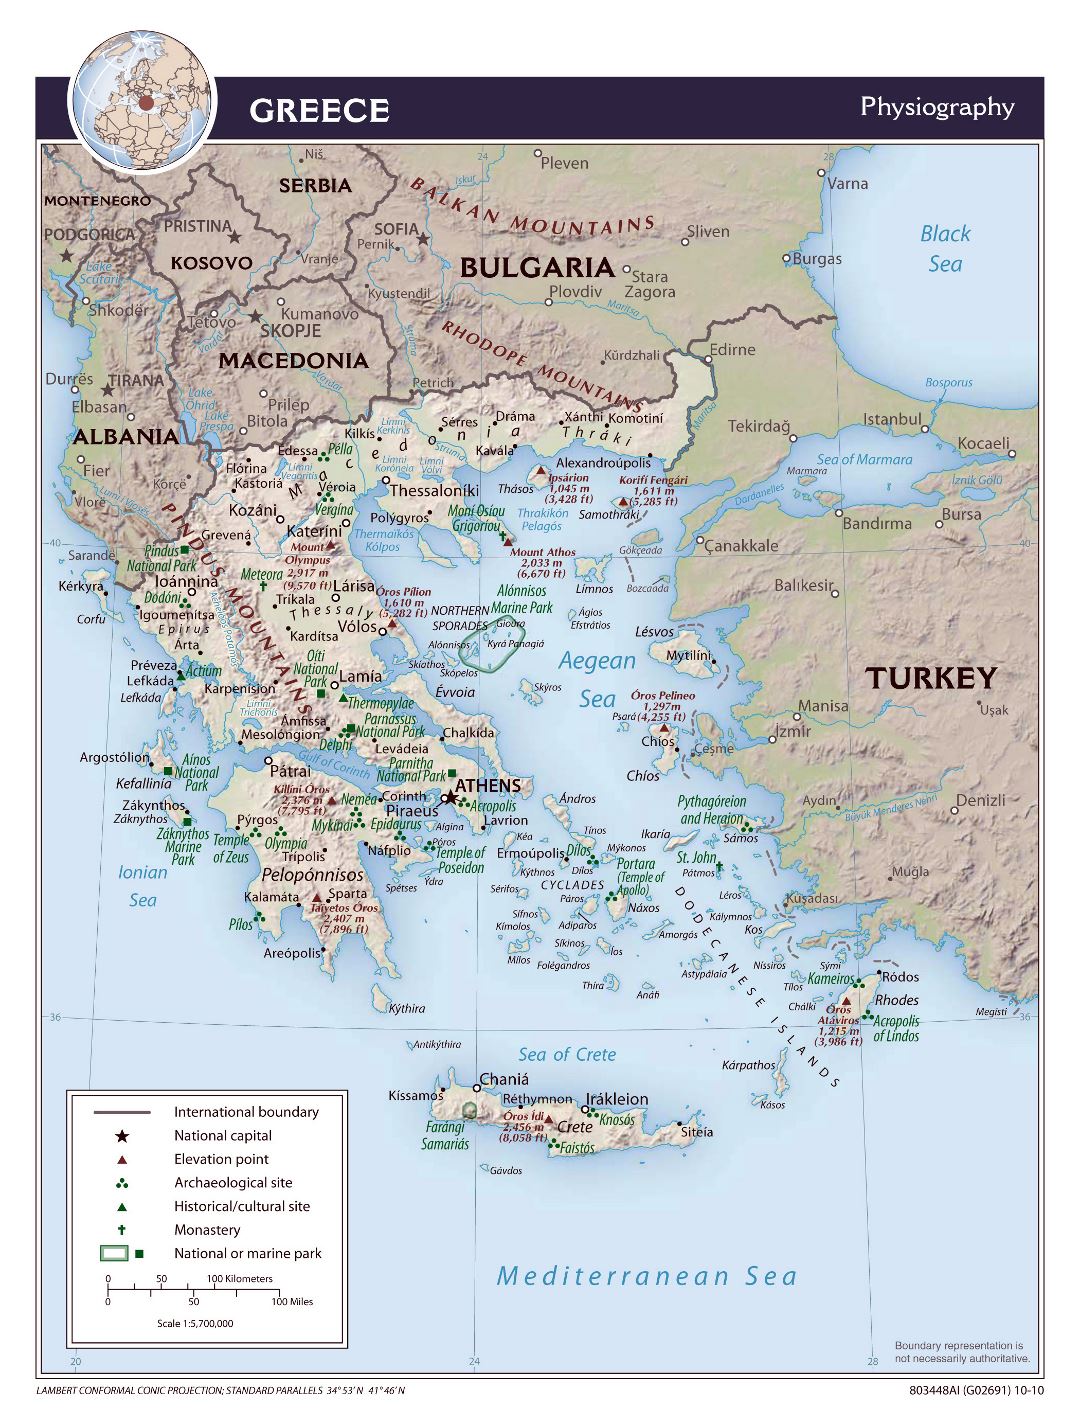 Large scale physiography map of Greece - 2010